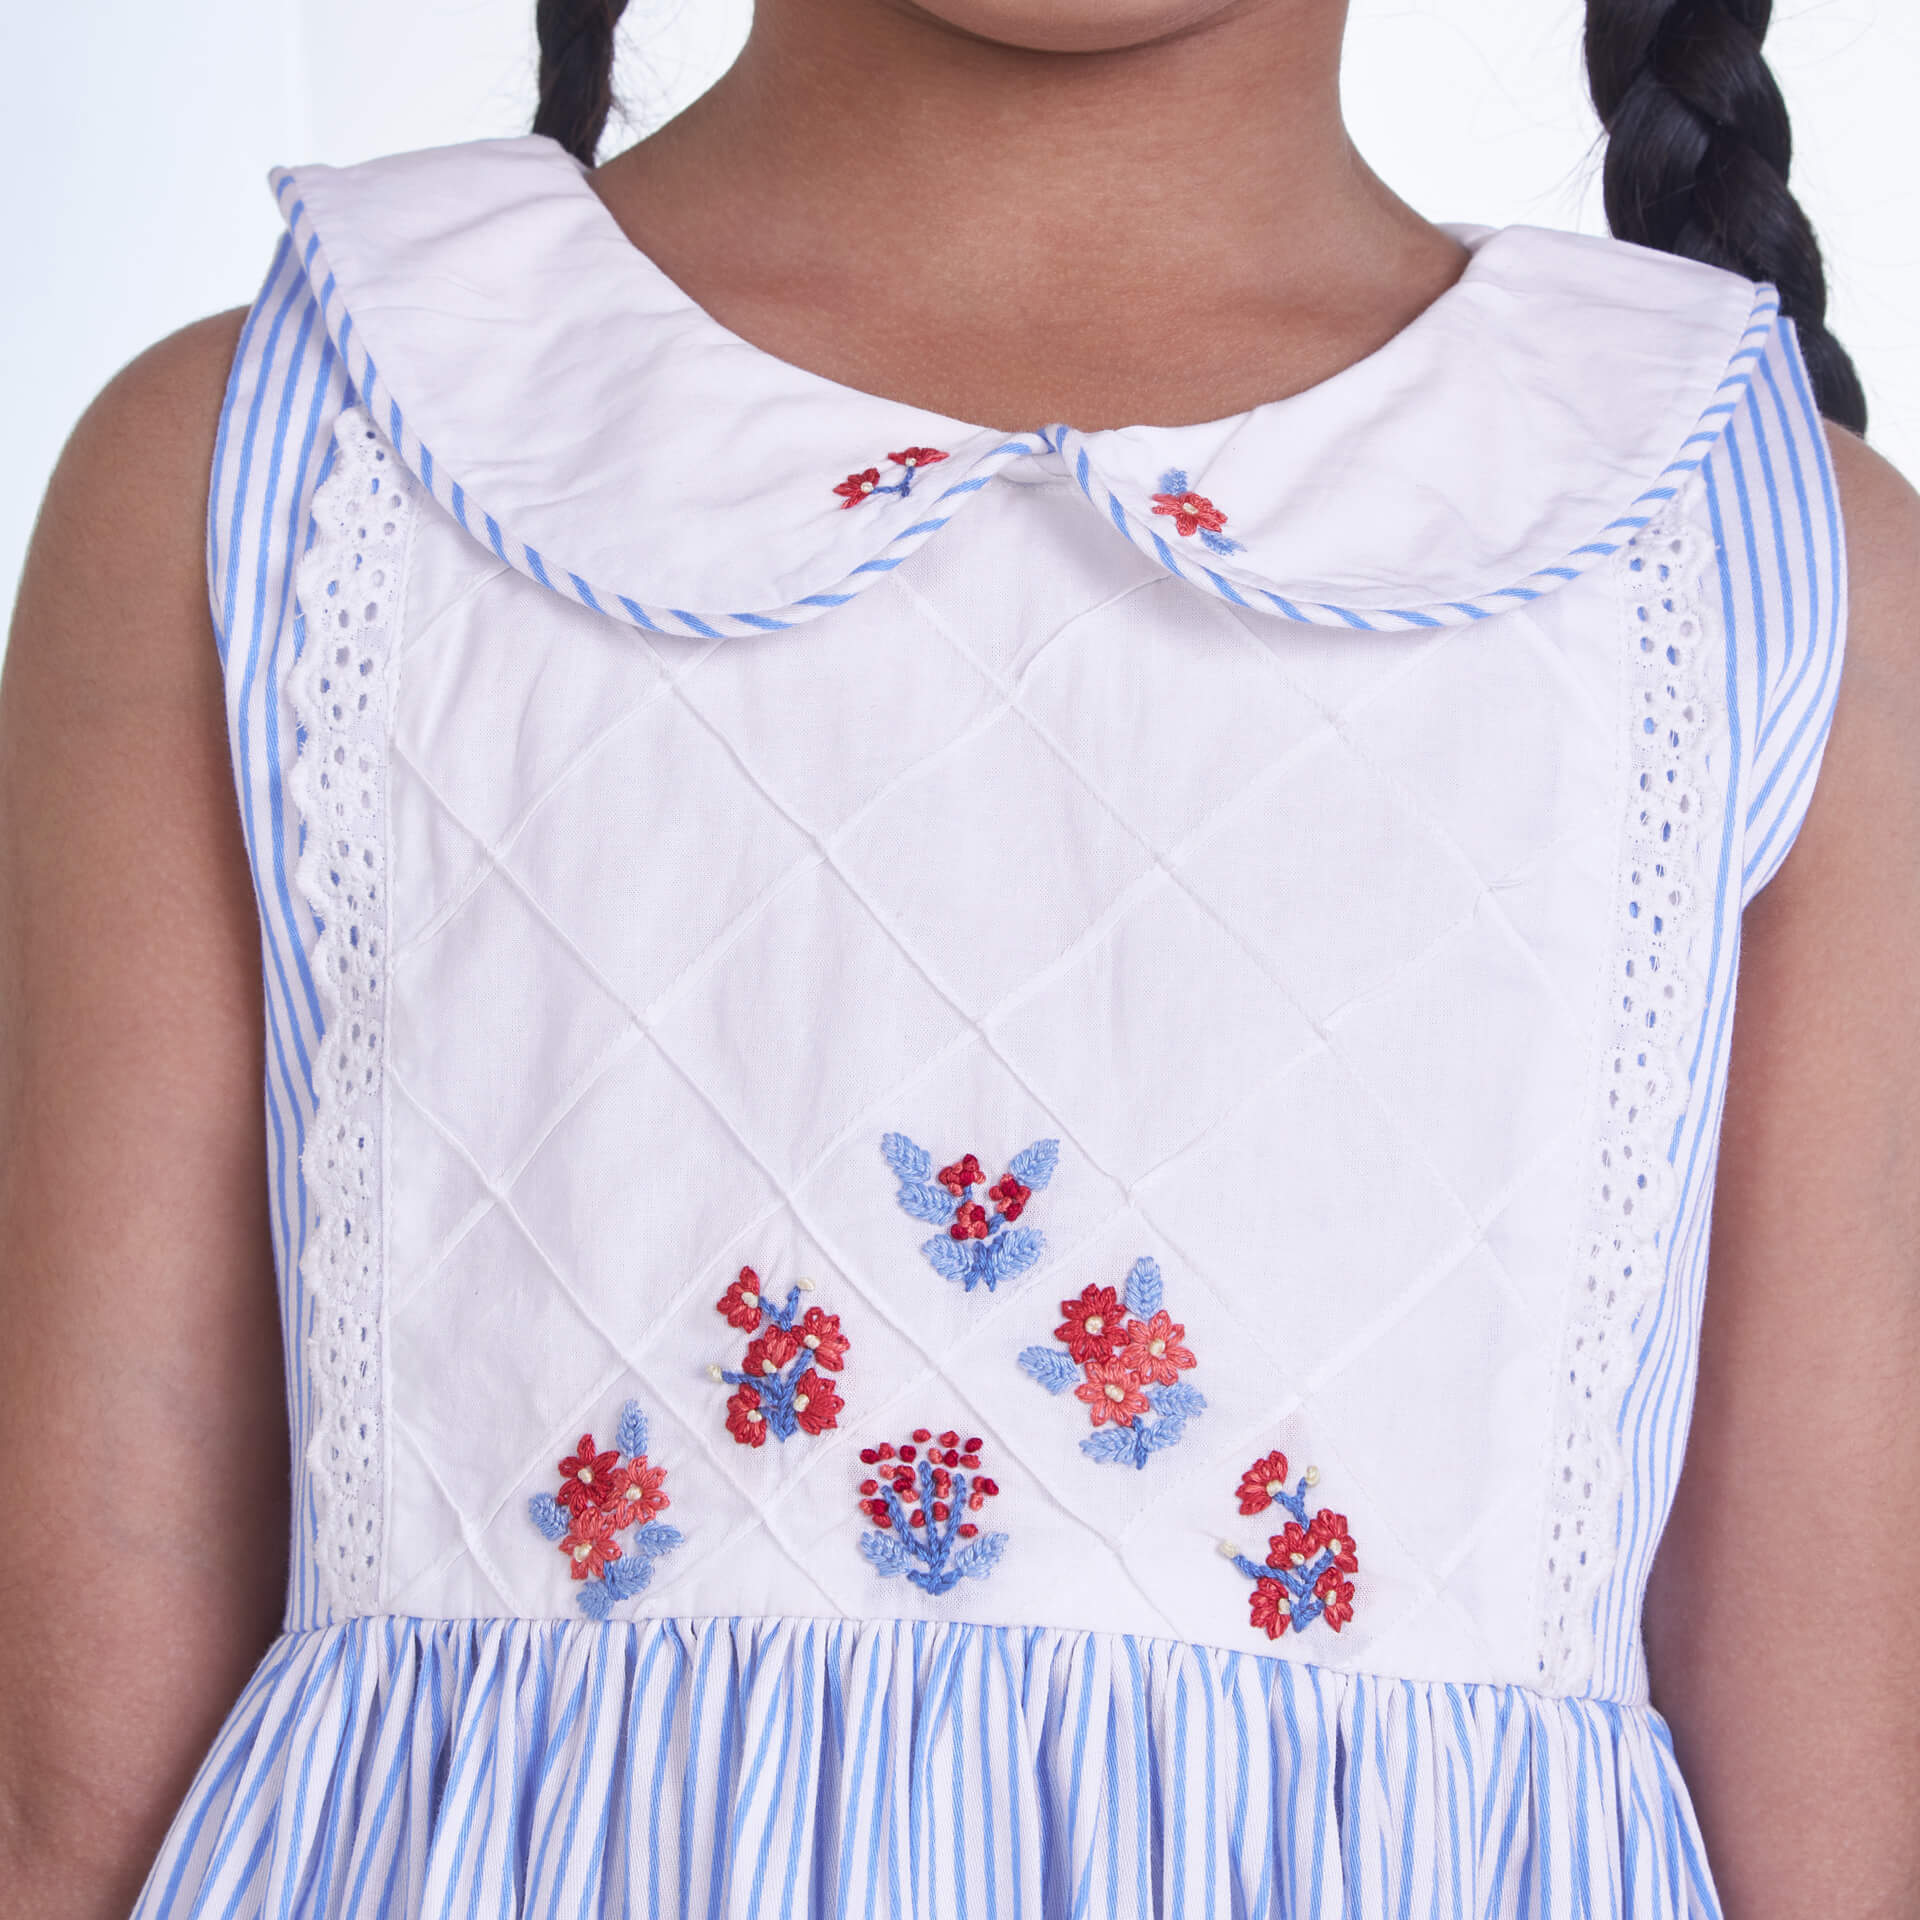 Closeup of the embroidery on a blue striped collared dress